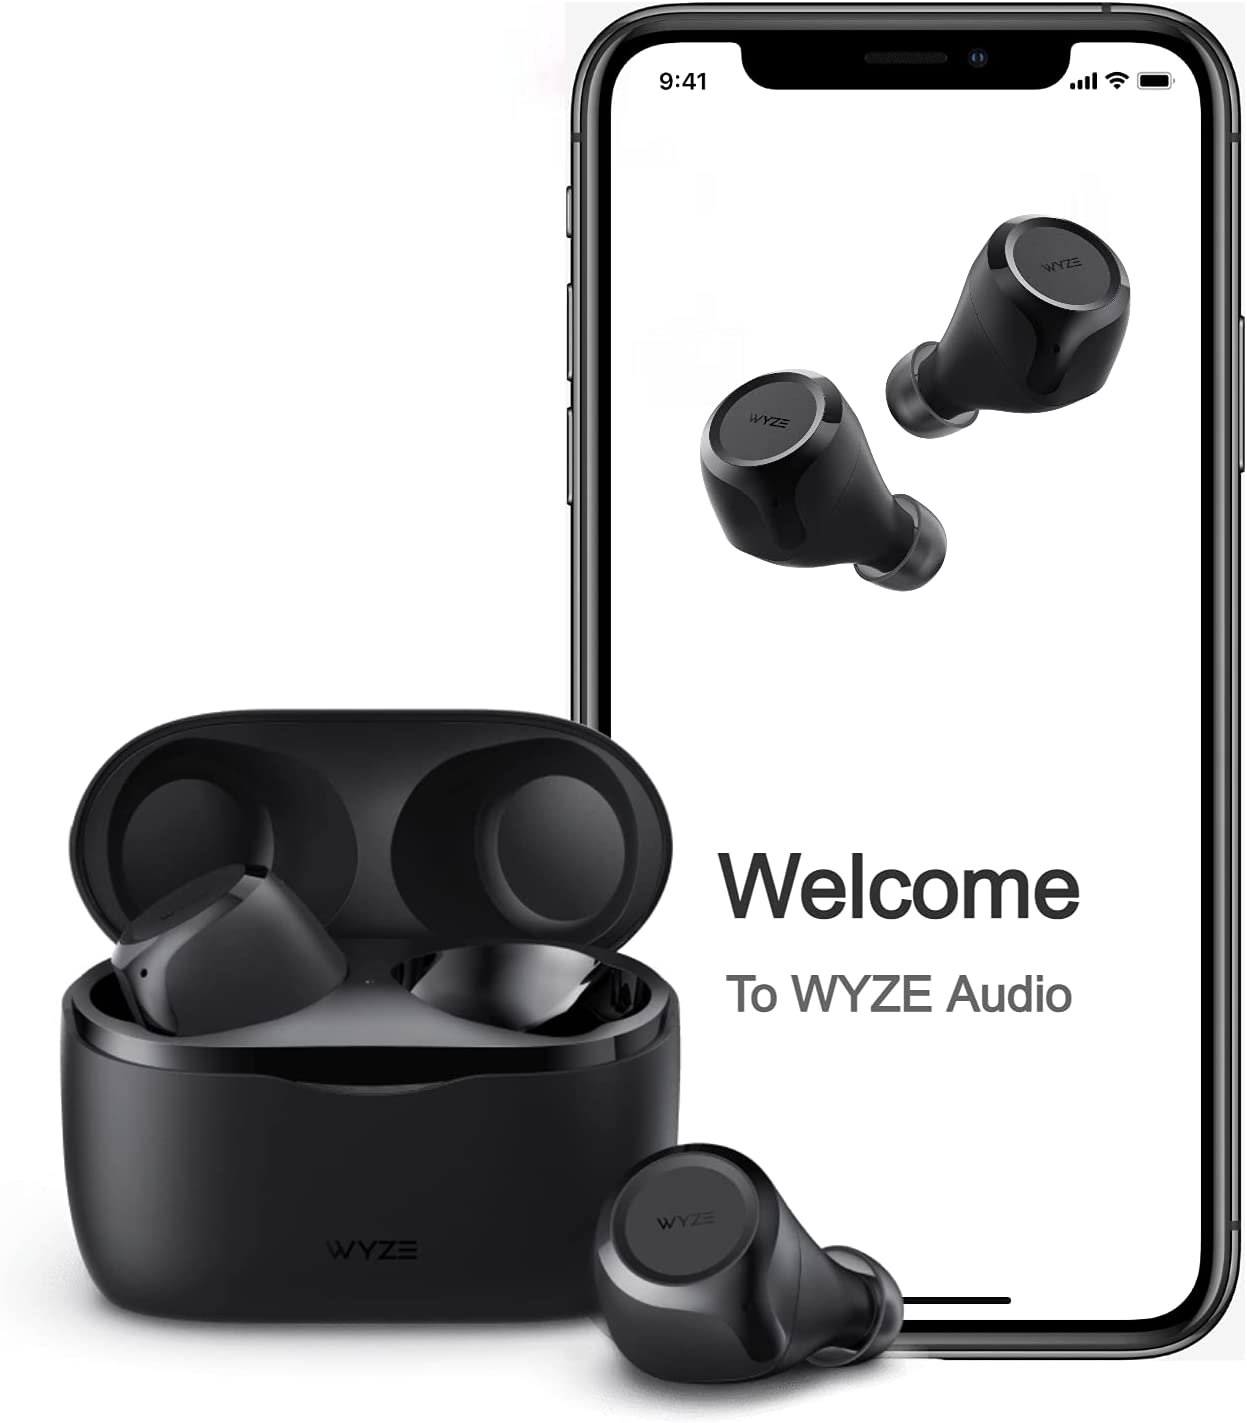 WYZE Wireless Earbuds 5.0 Bluetooth Headphones with IPX5 Sweat Resistance - Review